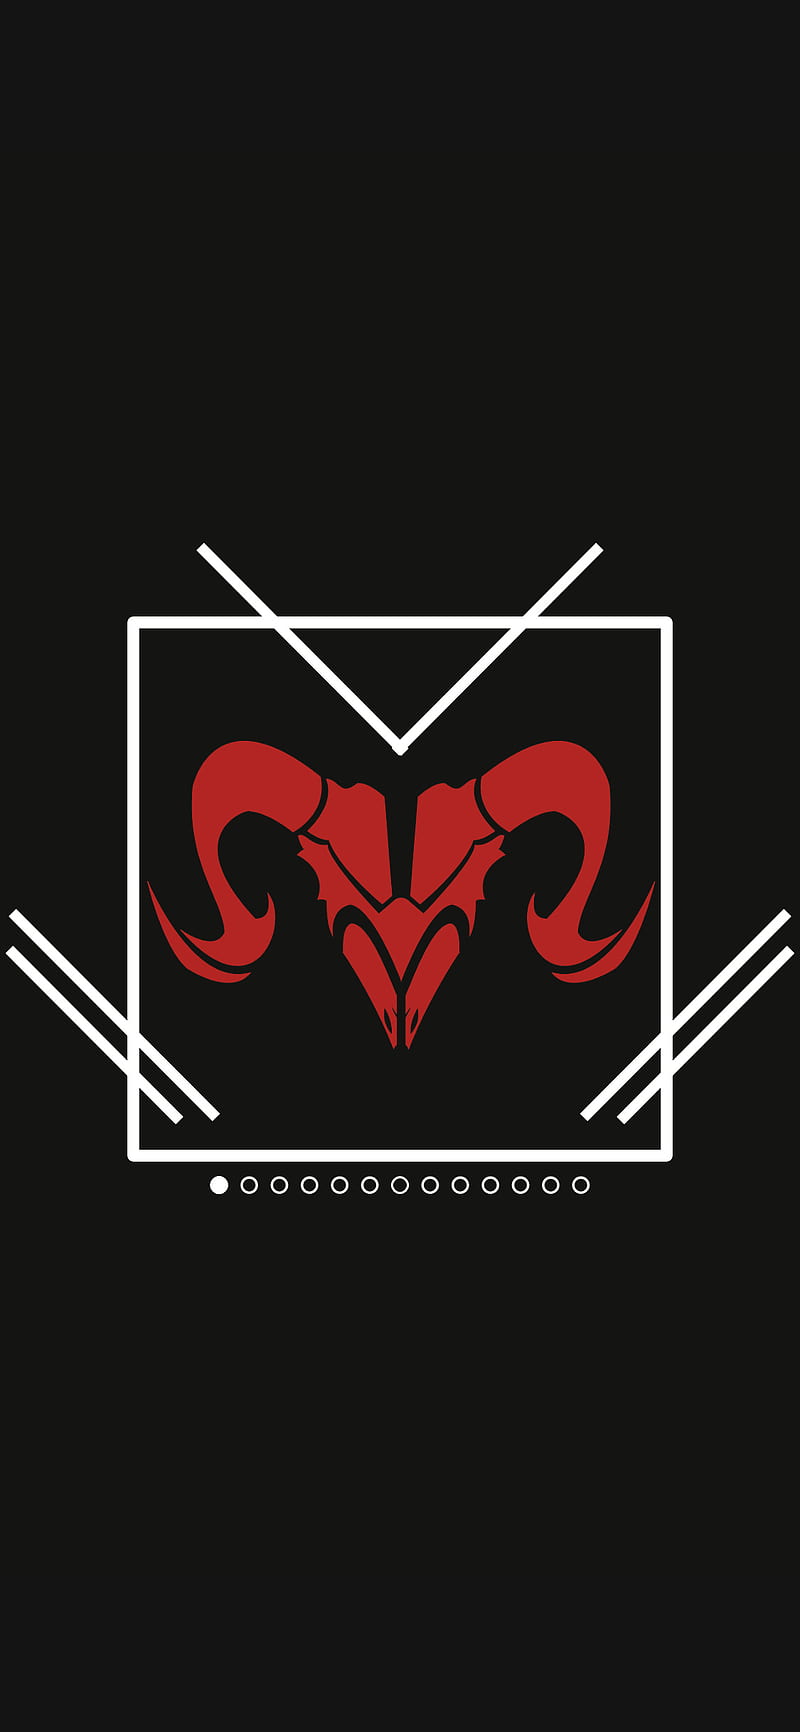 The image of a red demon with horns on it - Aries